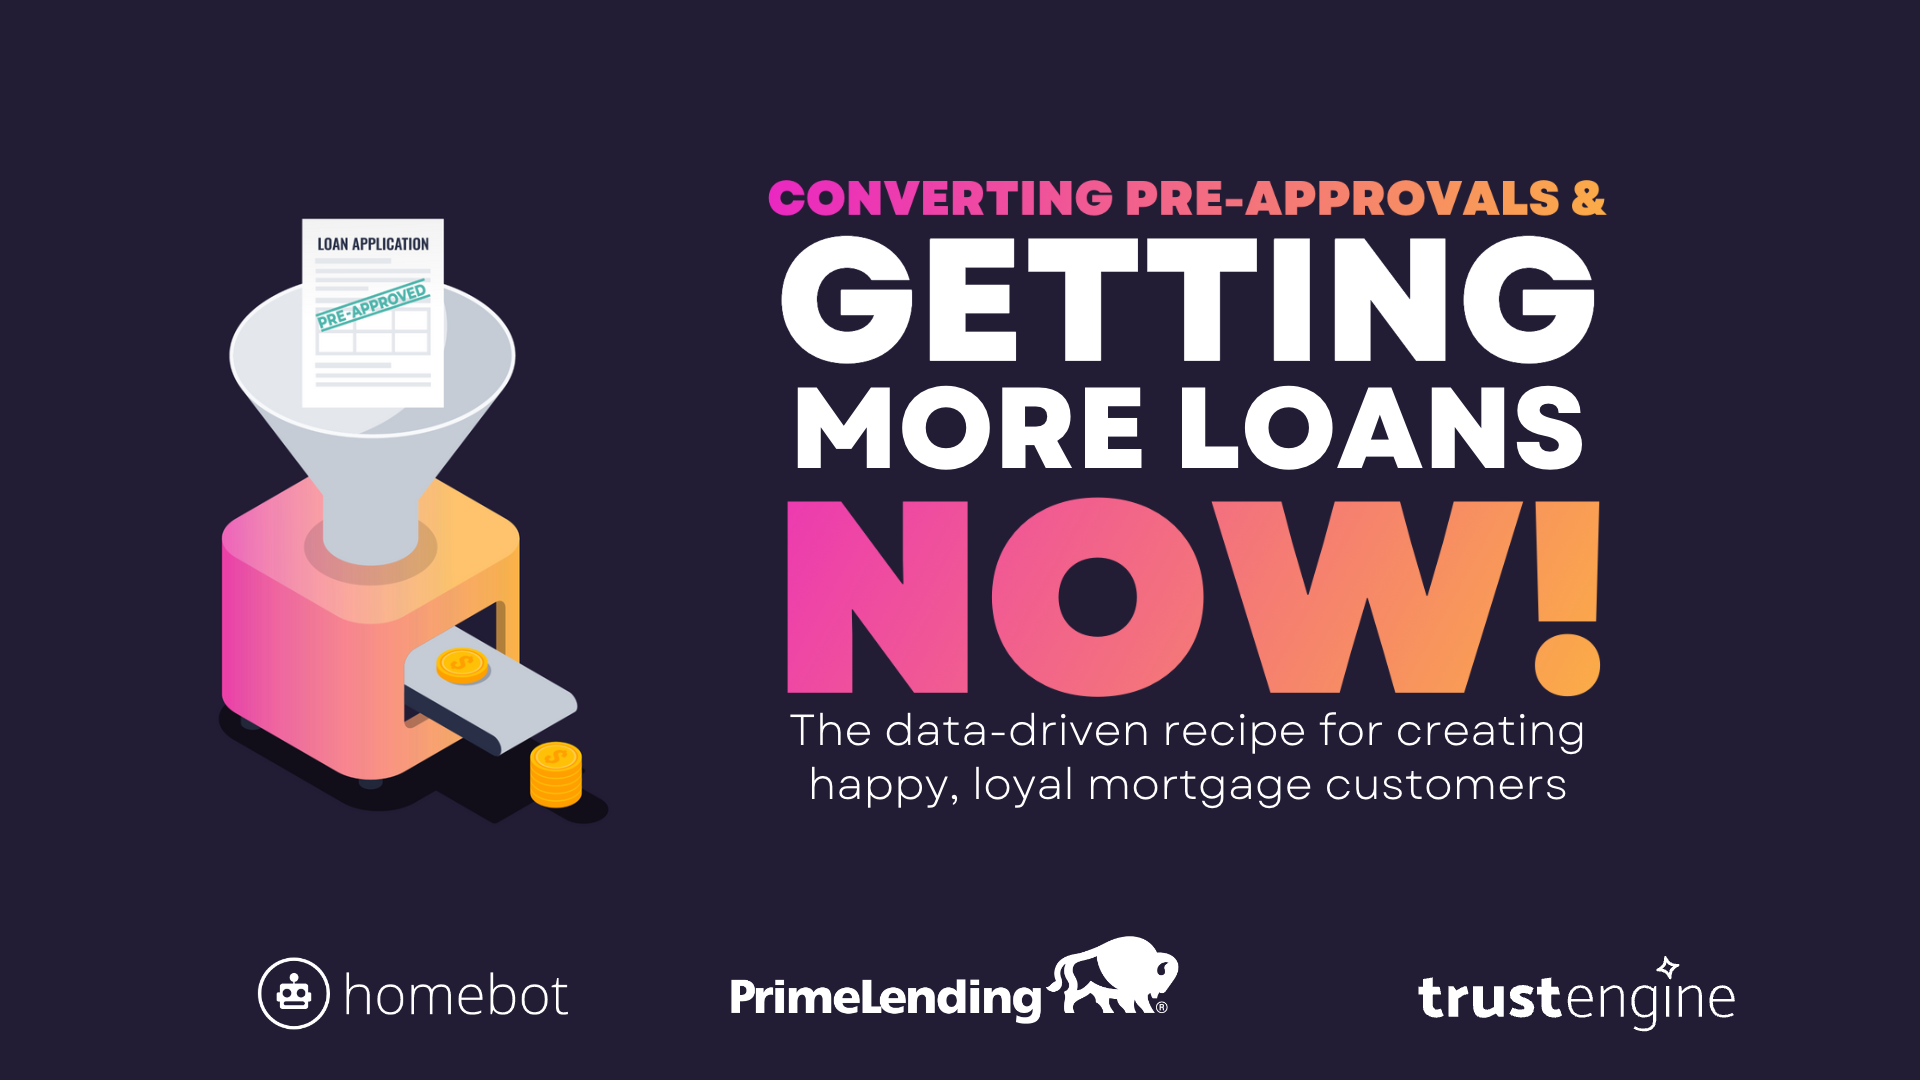 Converting Pre-Approvals and Getting More Loans NOW!